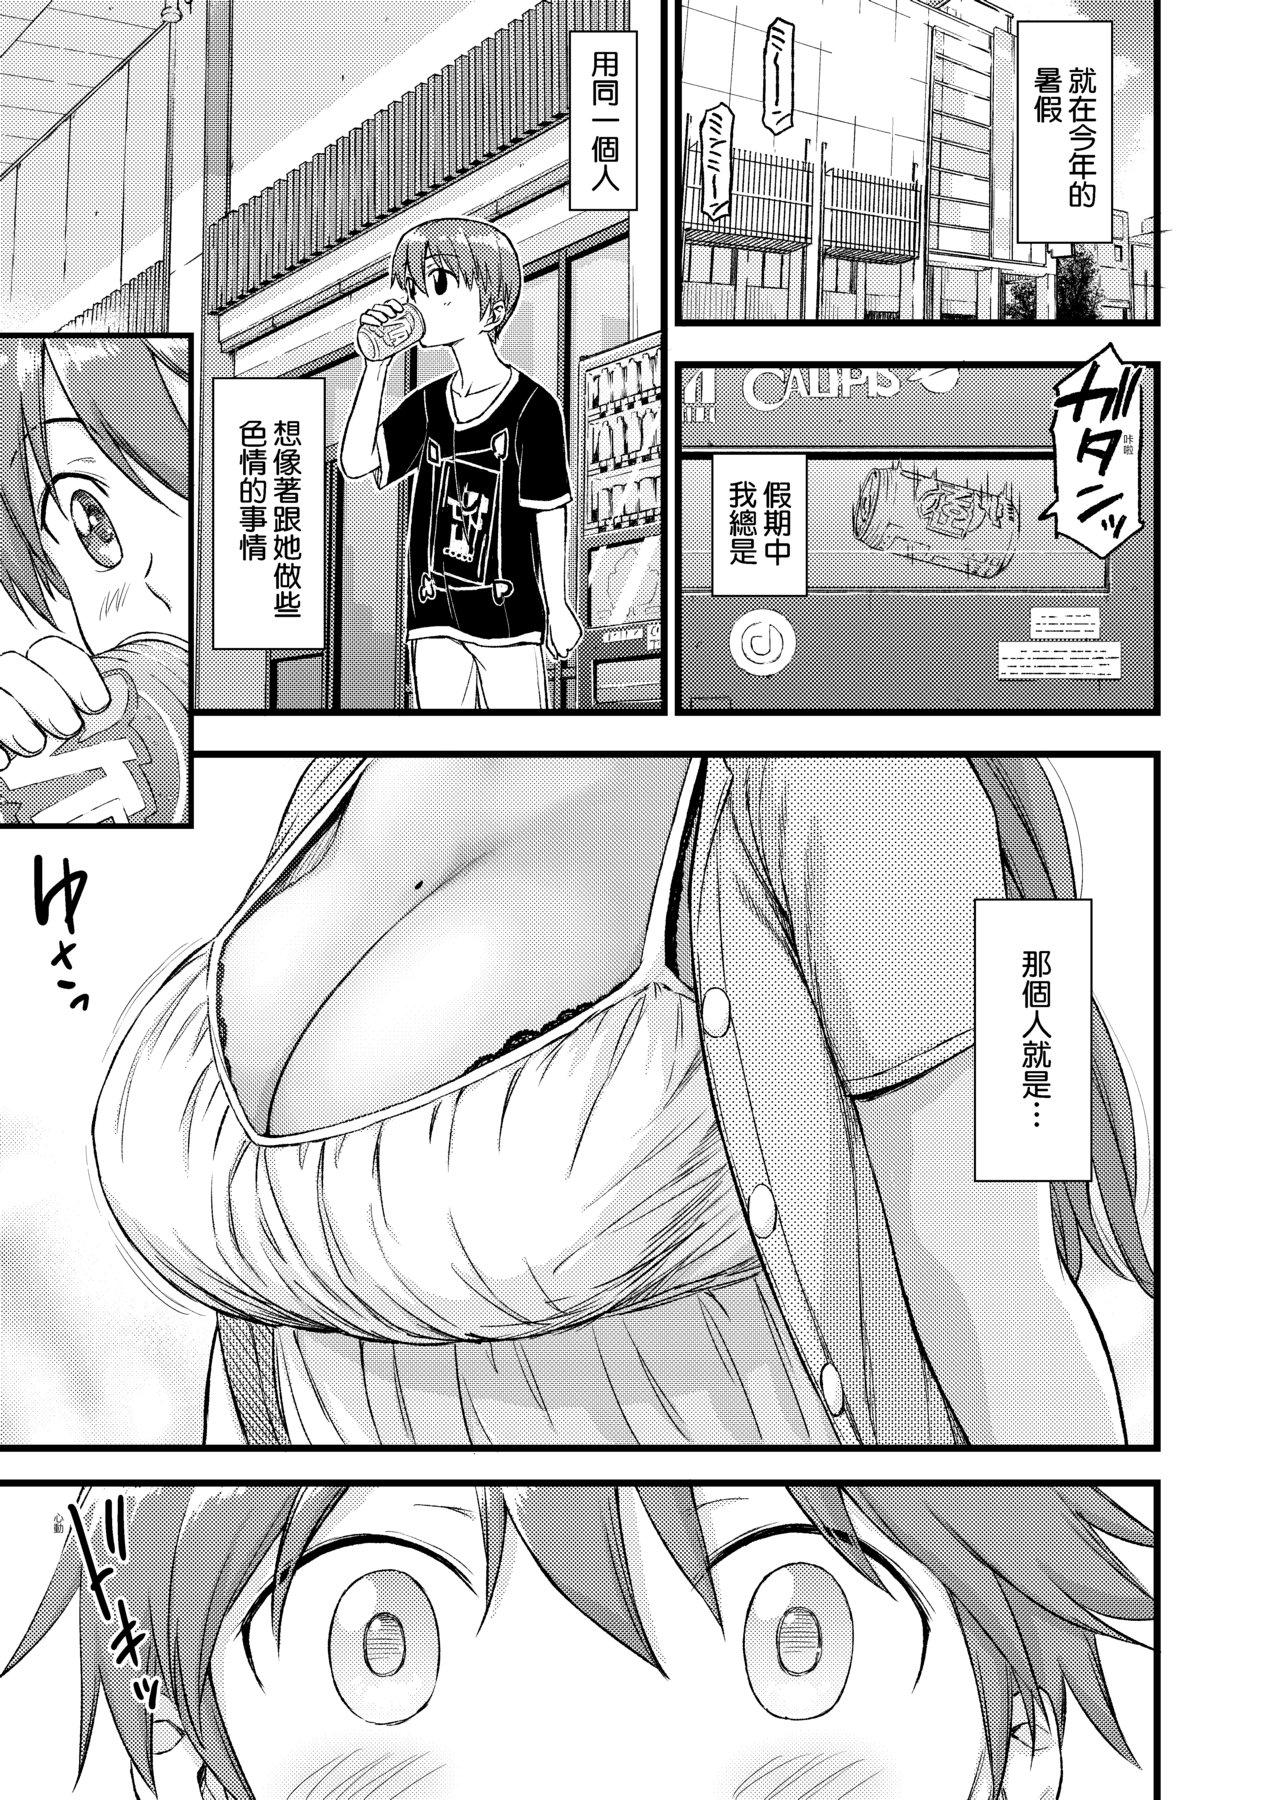 Behind Oppai na Natsuyasumi - Summer Vacation With Oppai | 乳香四溢的暑假 Condom - Page 10